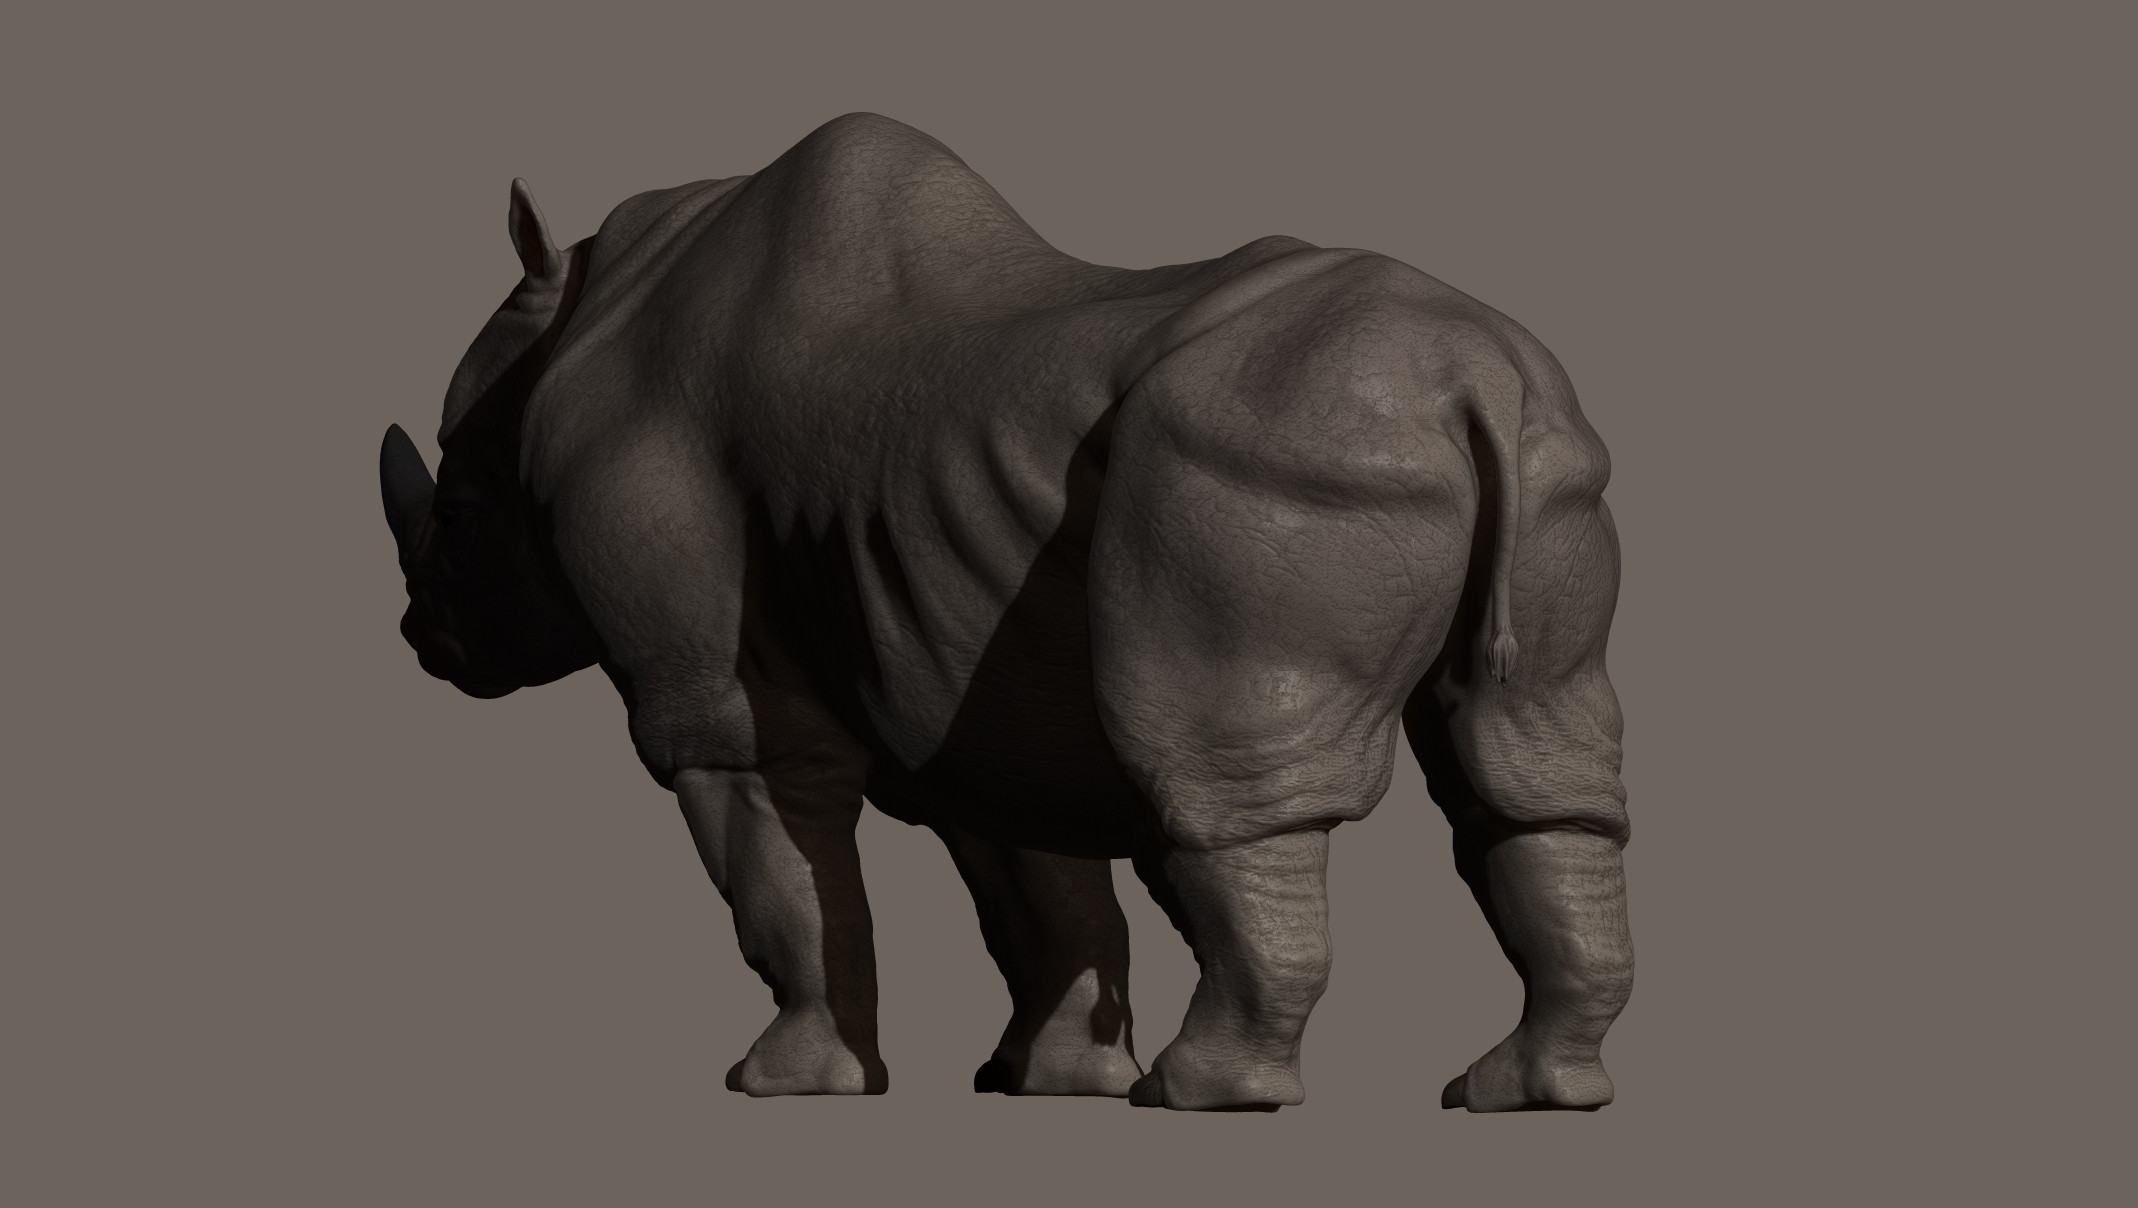 Back view of the High poly model.